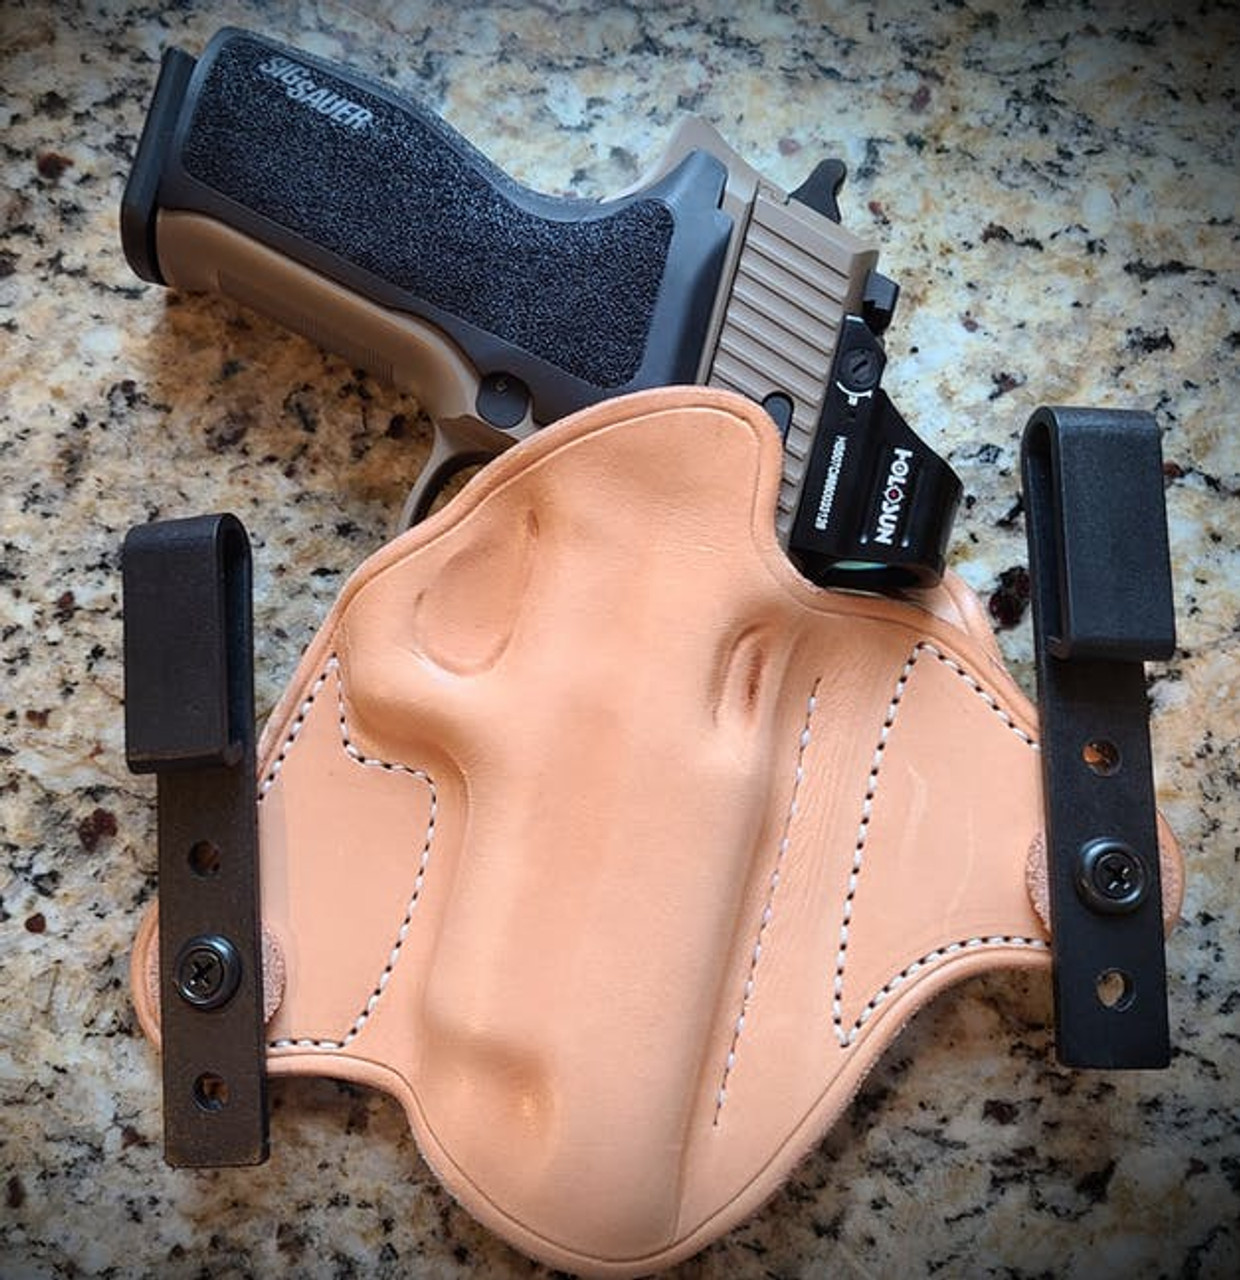 IWB Leather Holster - Made in U.S.A. - Fast Same Day Shipping!